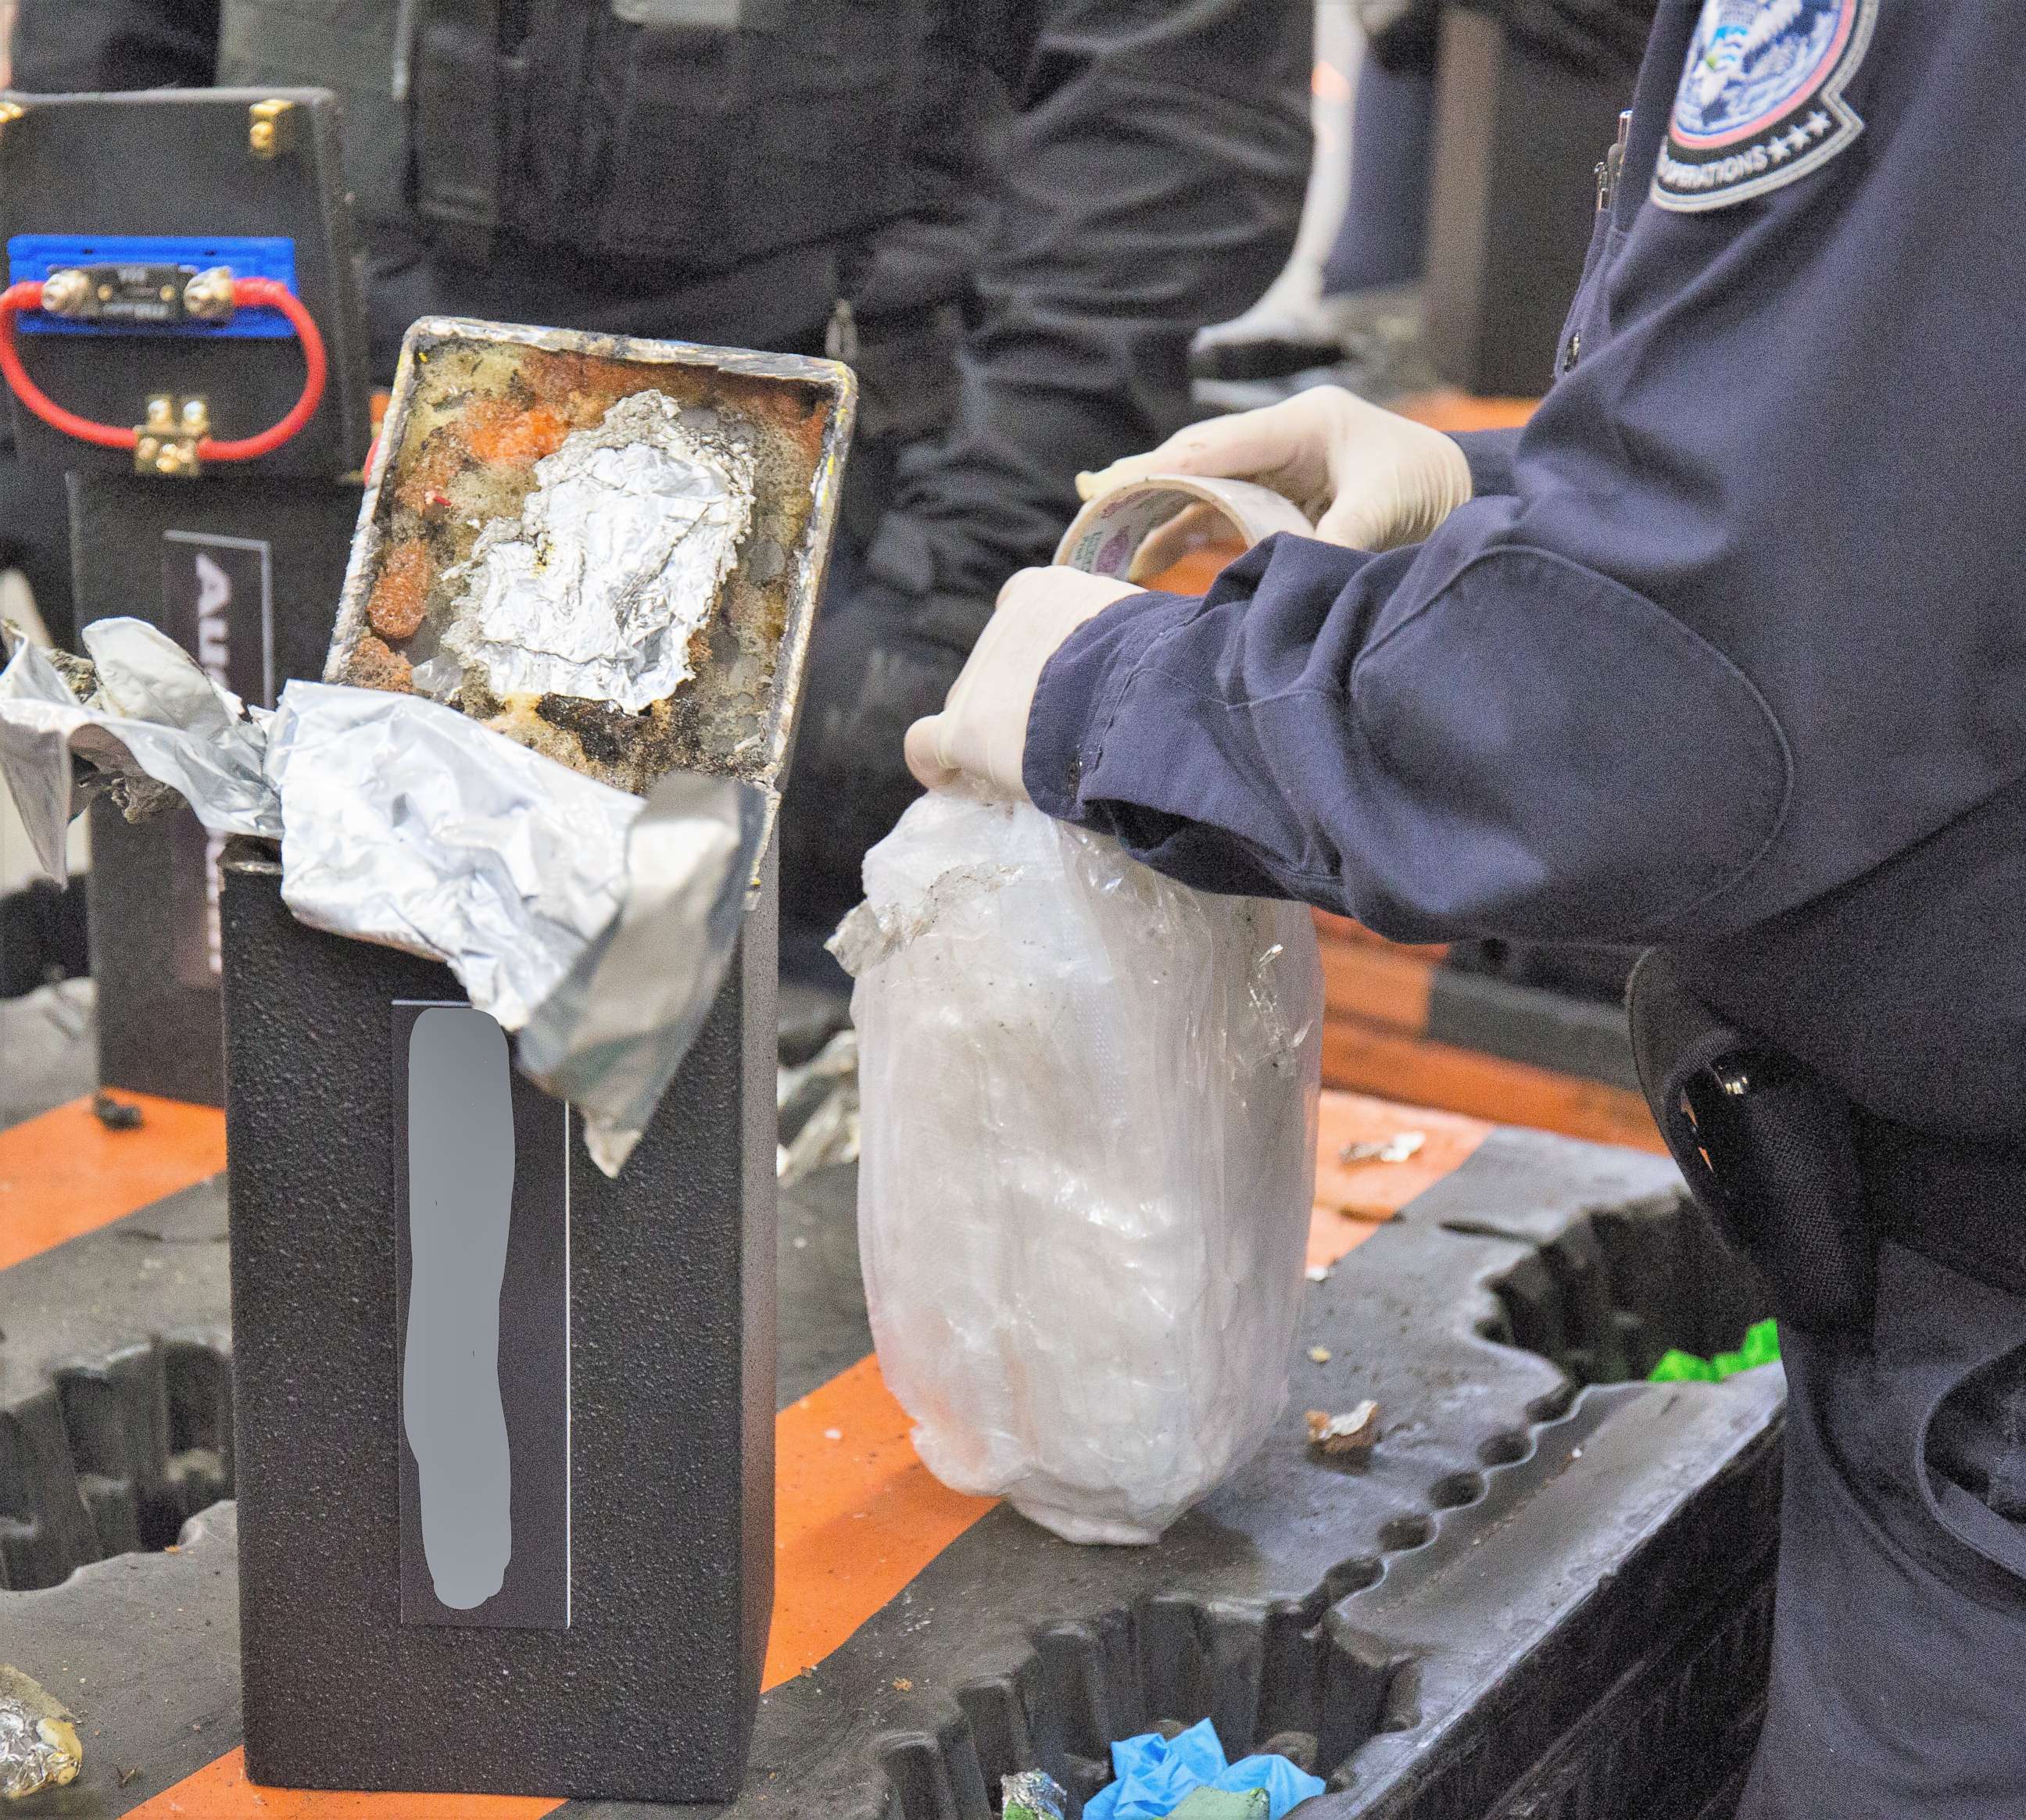 PHOTO: Customs and Border Protection agents discovered methamphetamine hidden in speakers at the Long Beach seaport in mid-January.